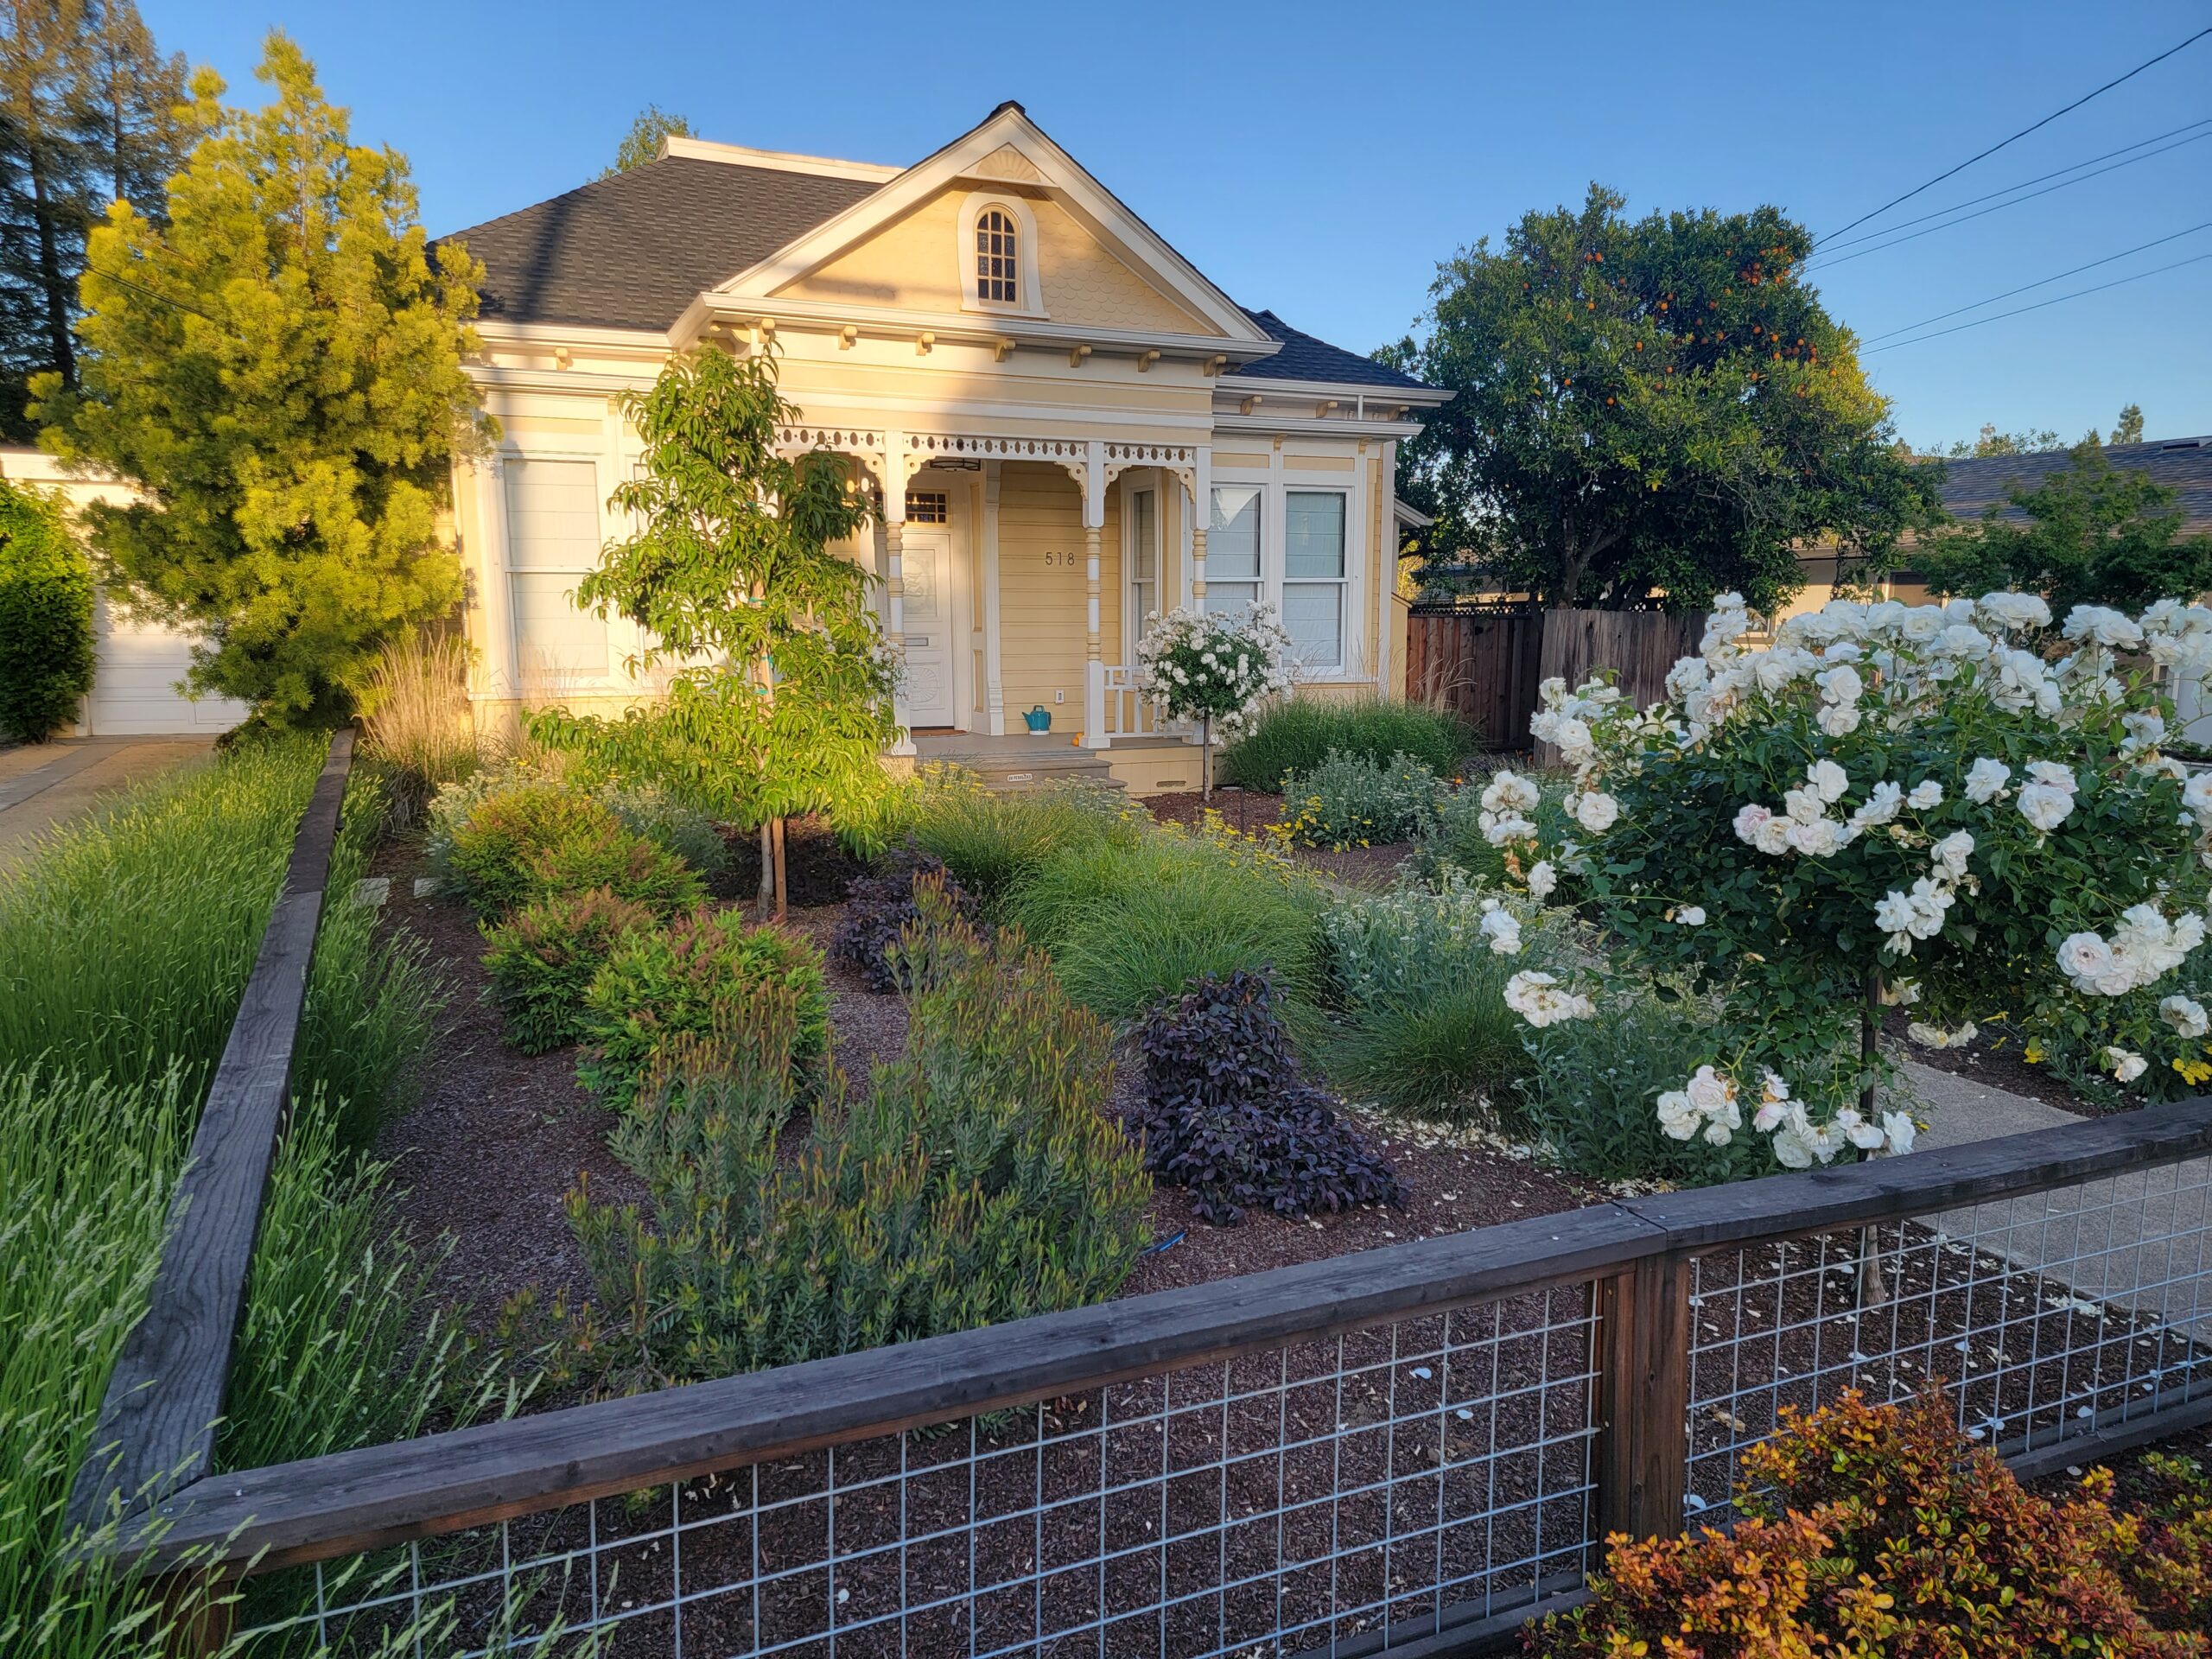 Small Front Yard Of A Home With Luscious Greenery And Landscaping